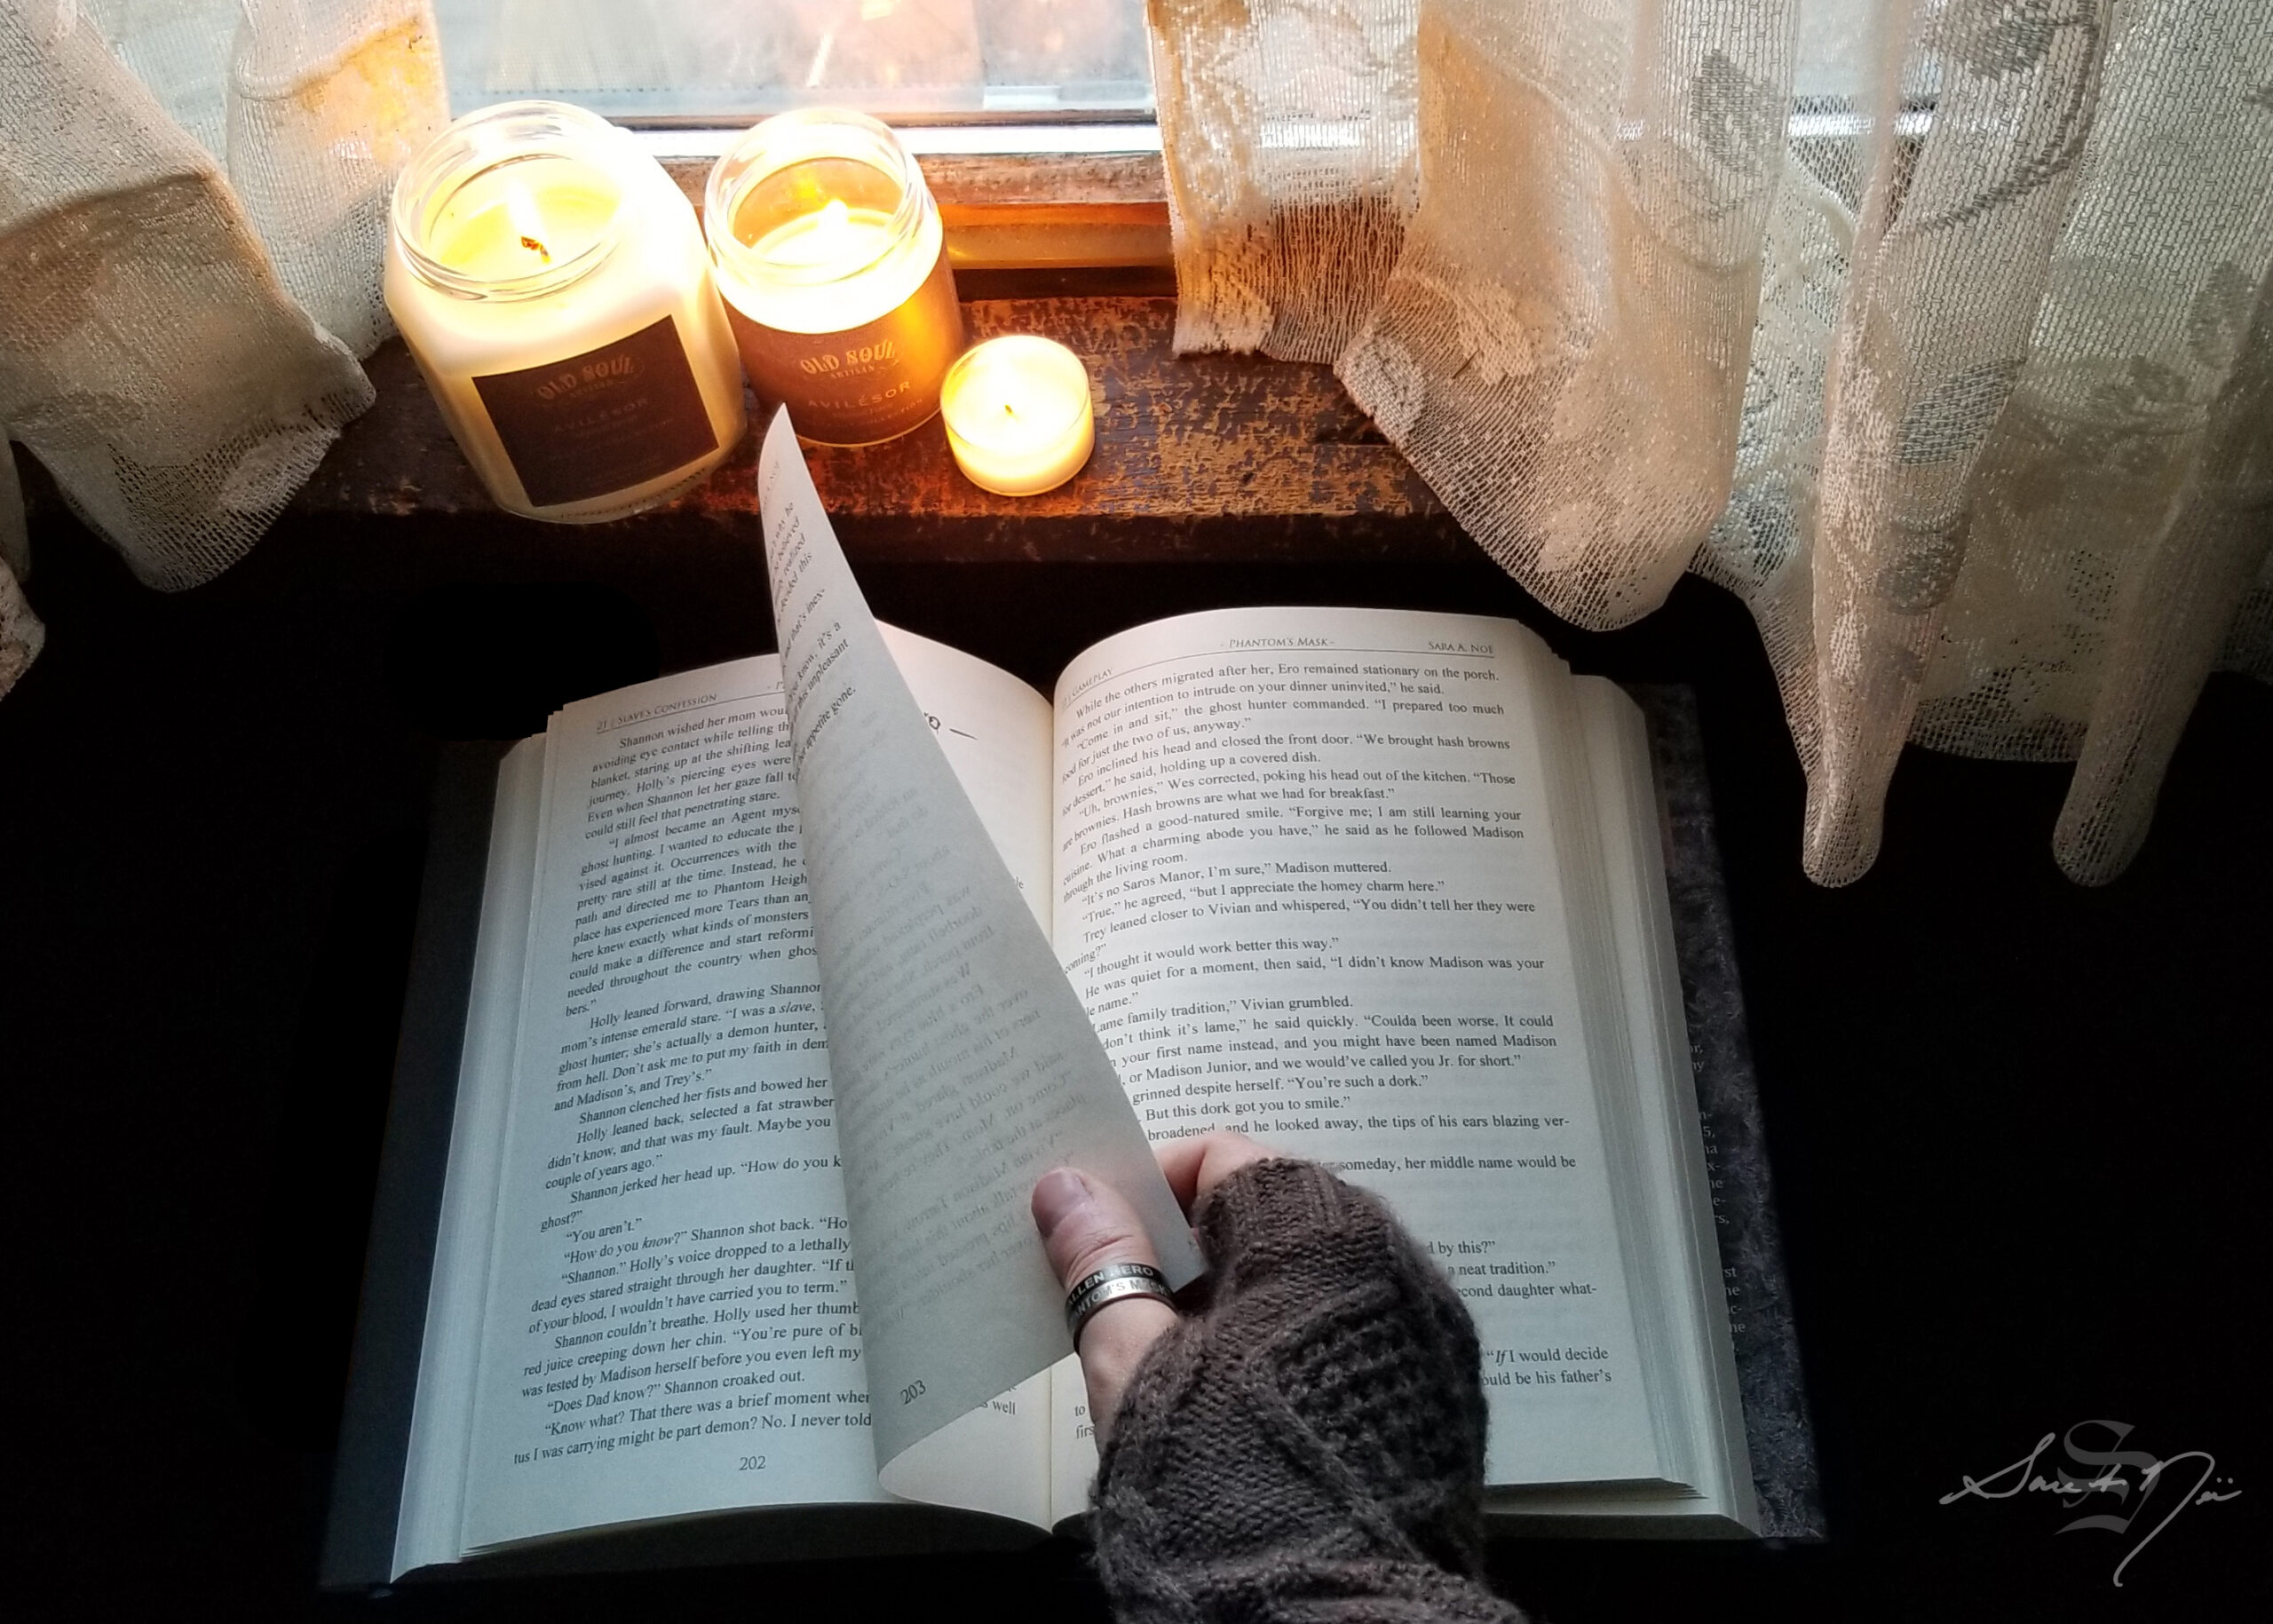 Turning a book page with candles burning